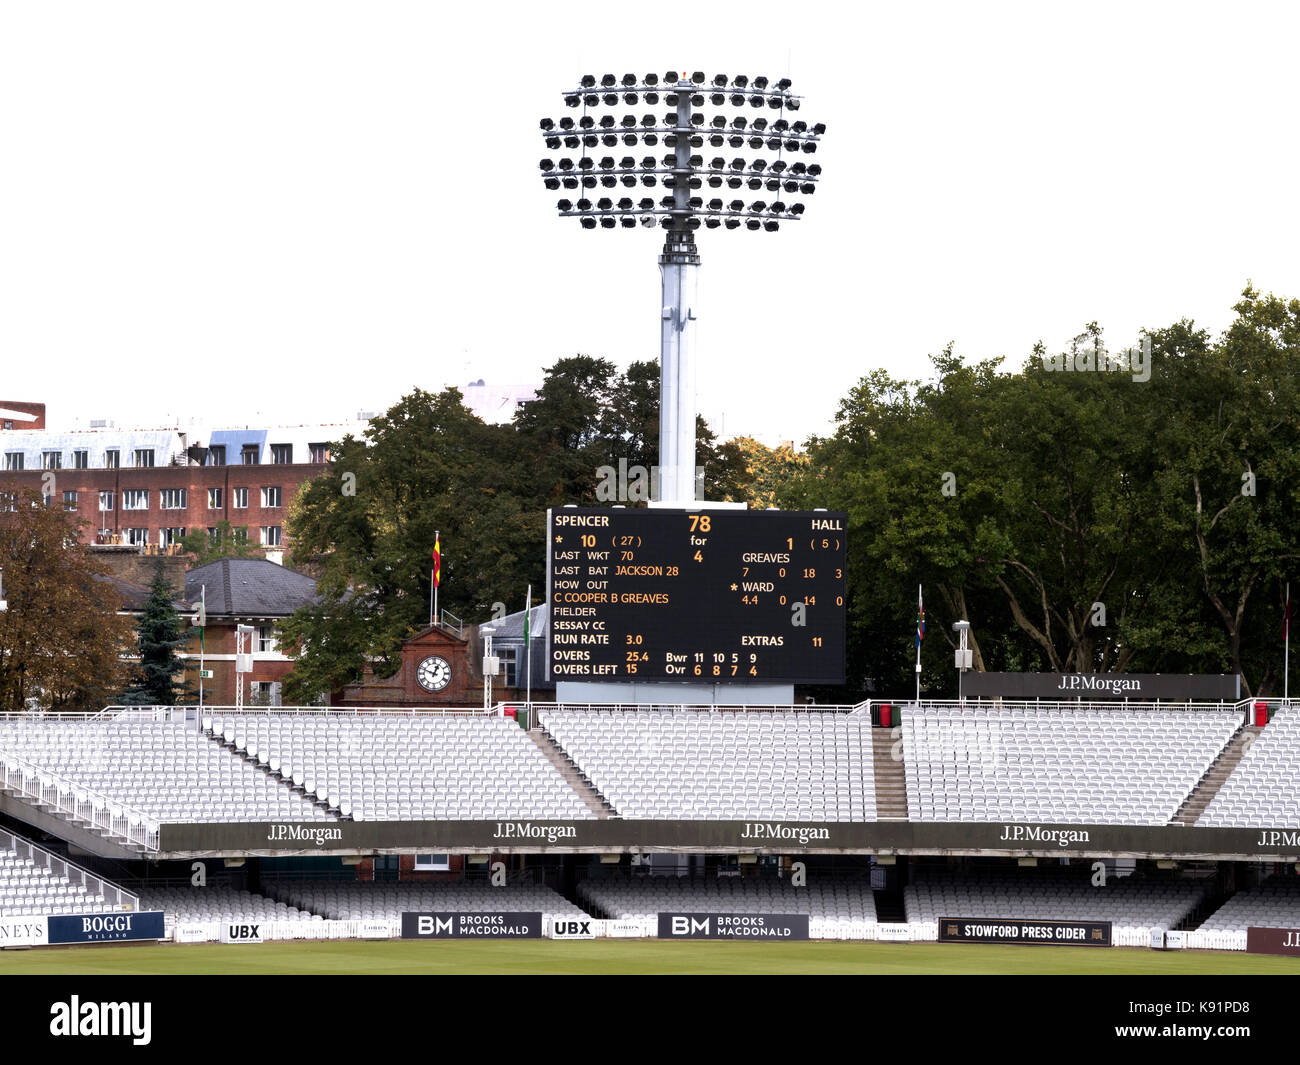 Flood lighting, score board and stand at Lords Cricket Ground, St Johns Wood, London, England, UK Stock Photo